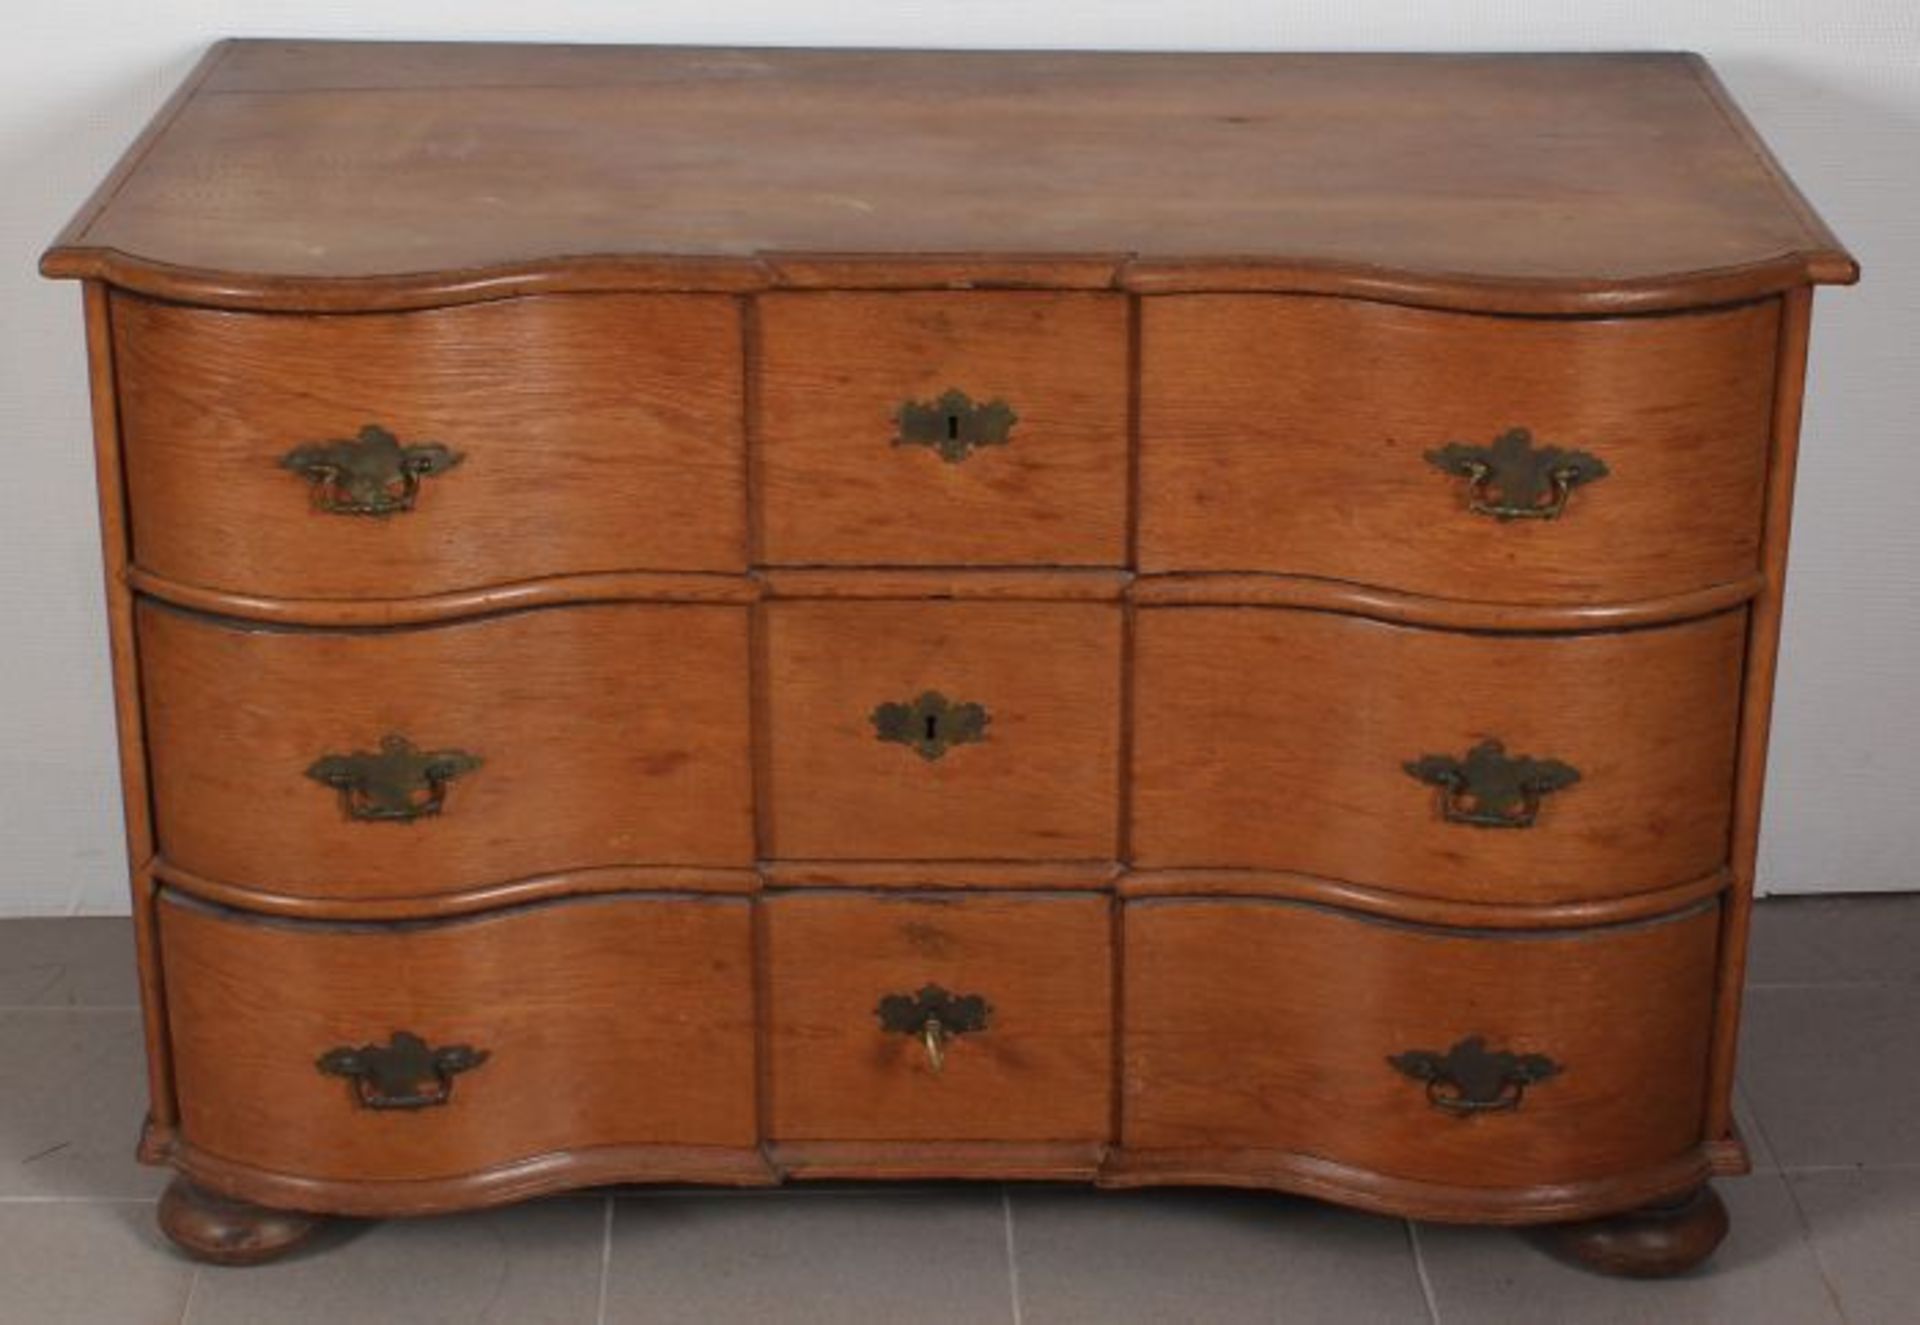 North German baroque 18th century oak chest of drawers, double curved with original lock and